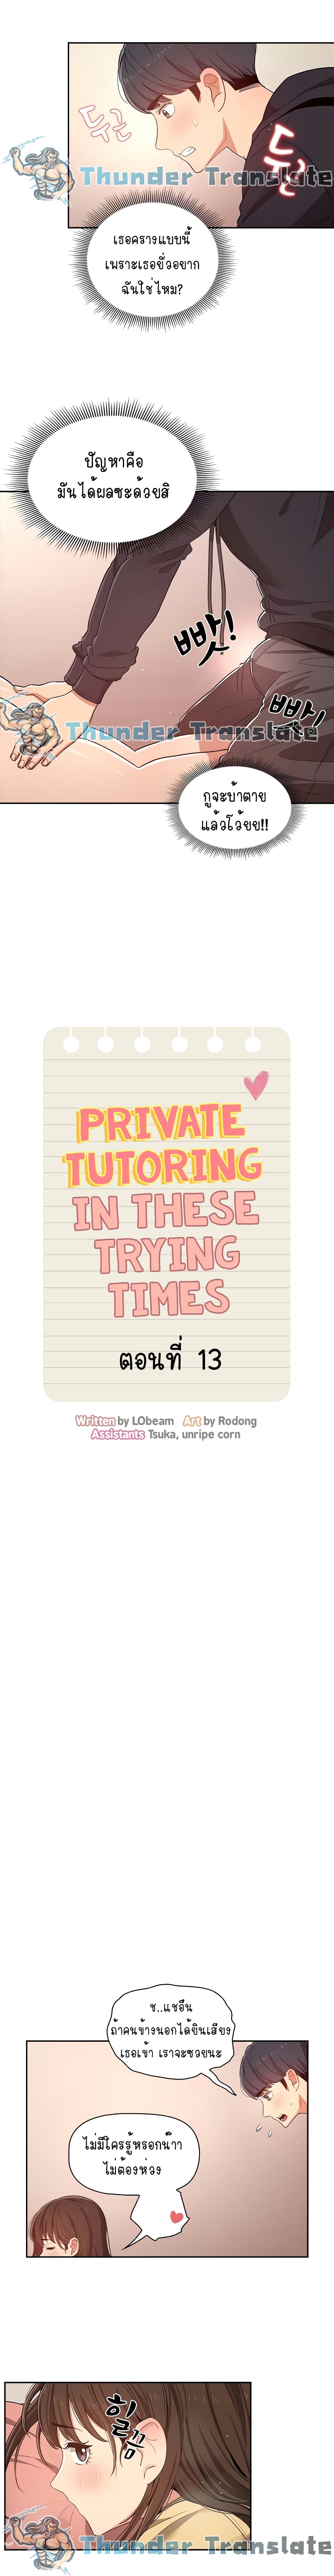 Private Tutoring in These Trying Times 13 (2)